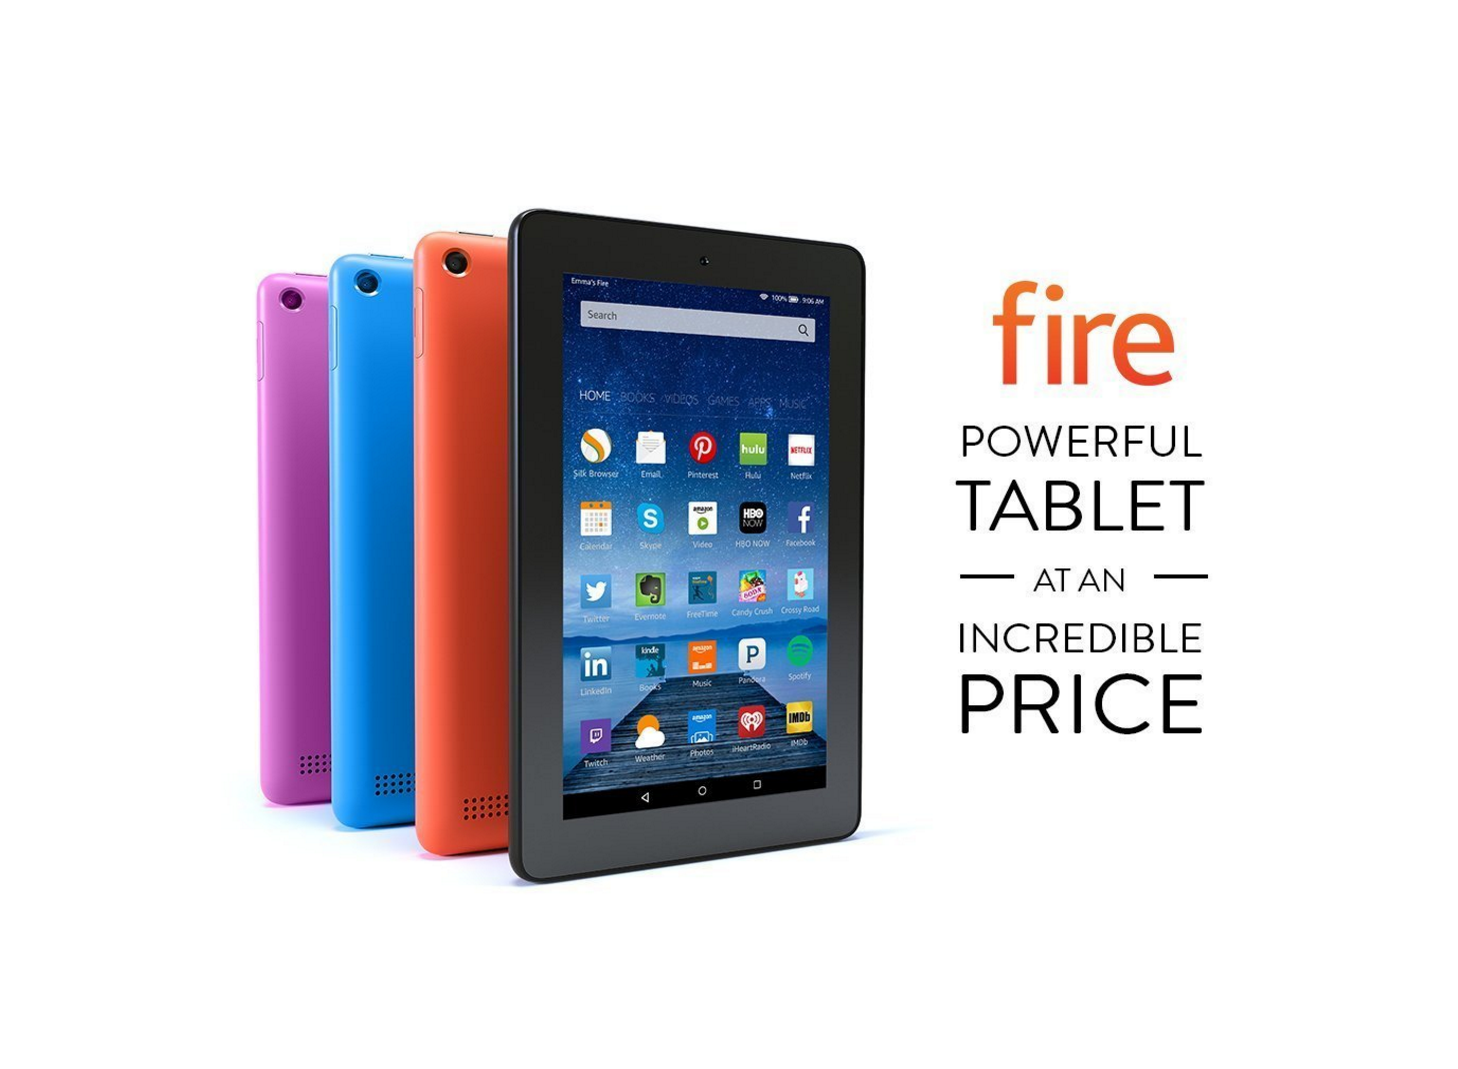 Amazon Kindle Fire Tablet $39 Today - All That Nerdy Stuff